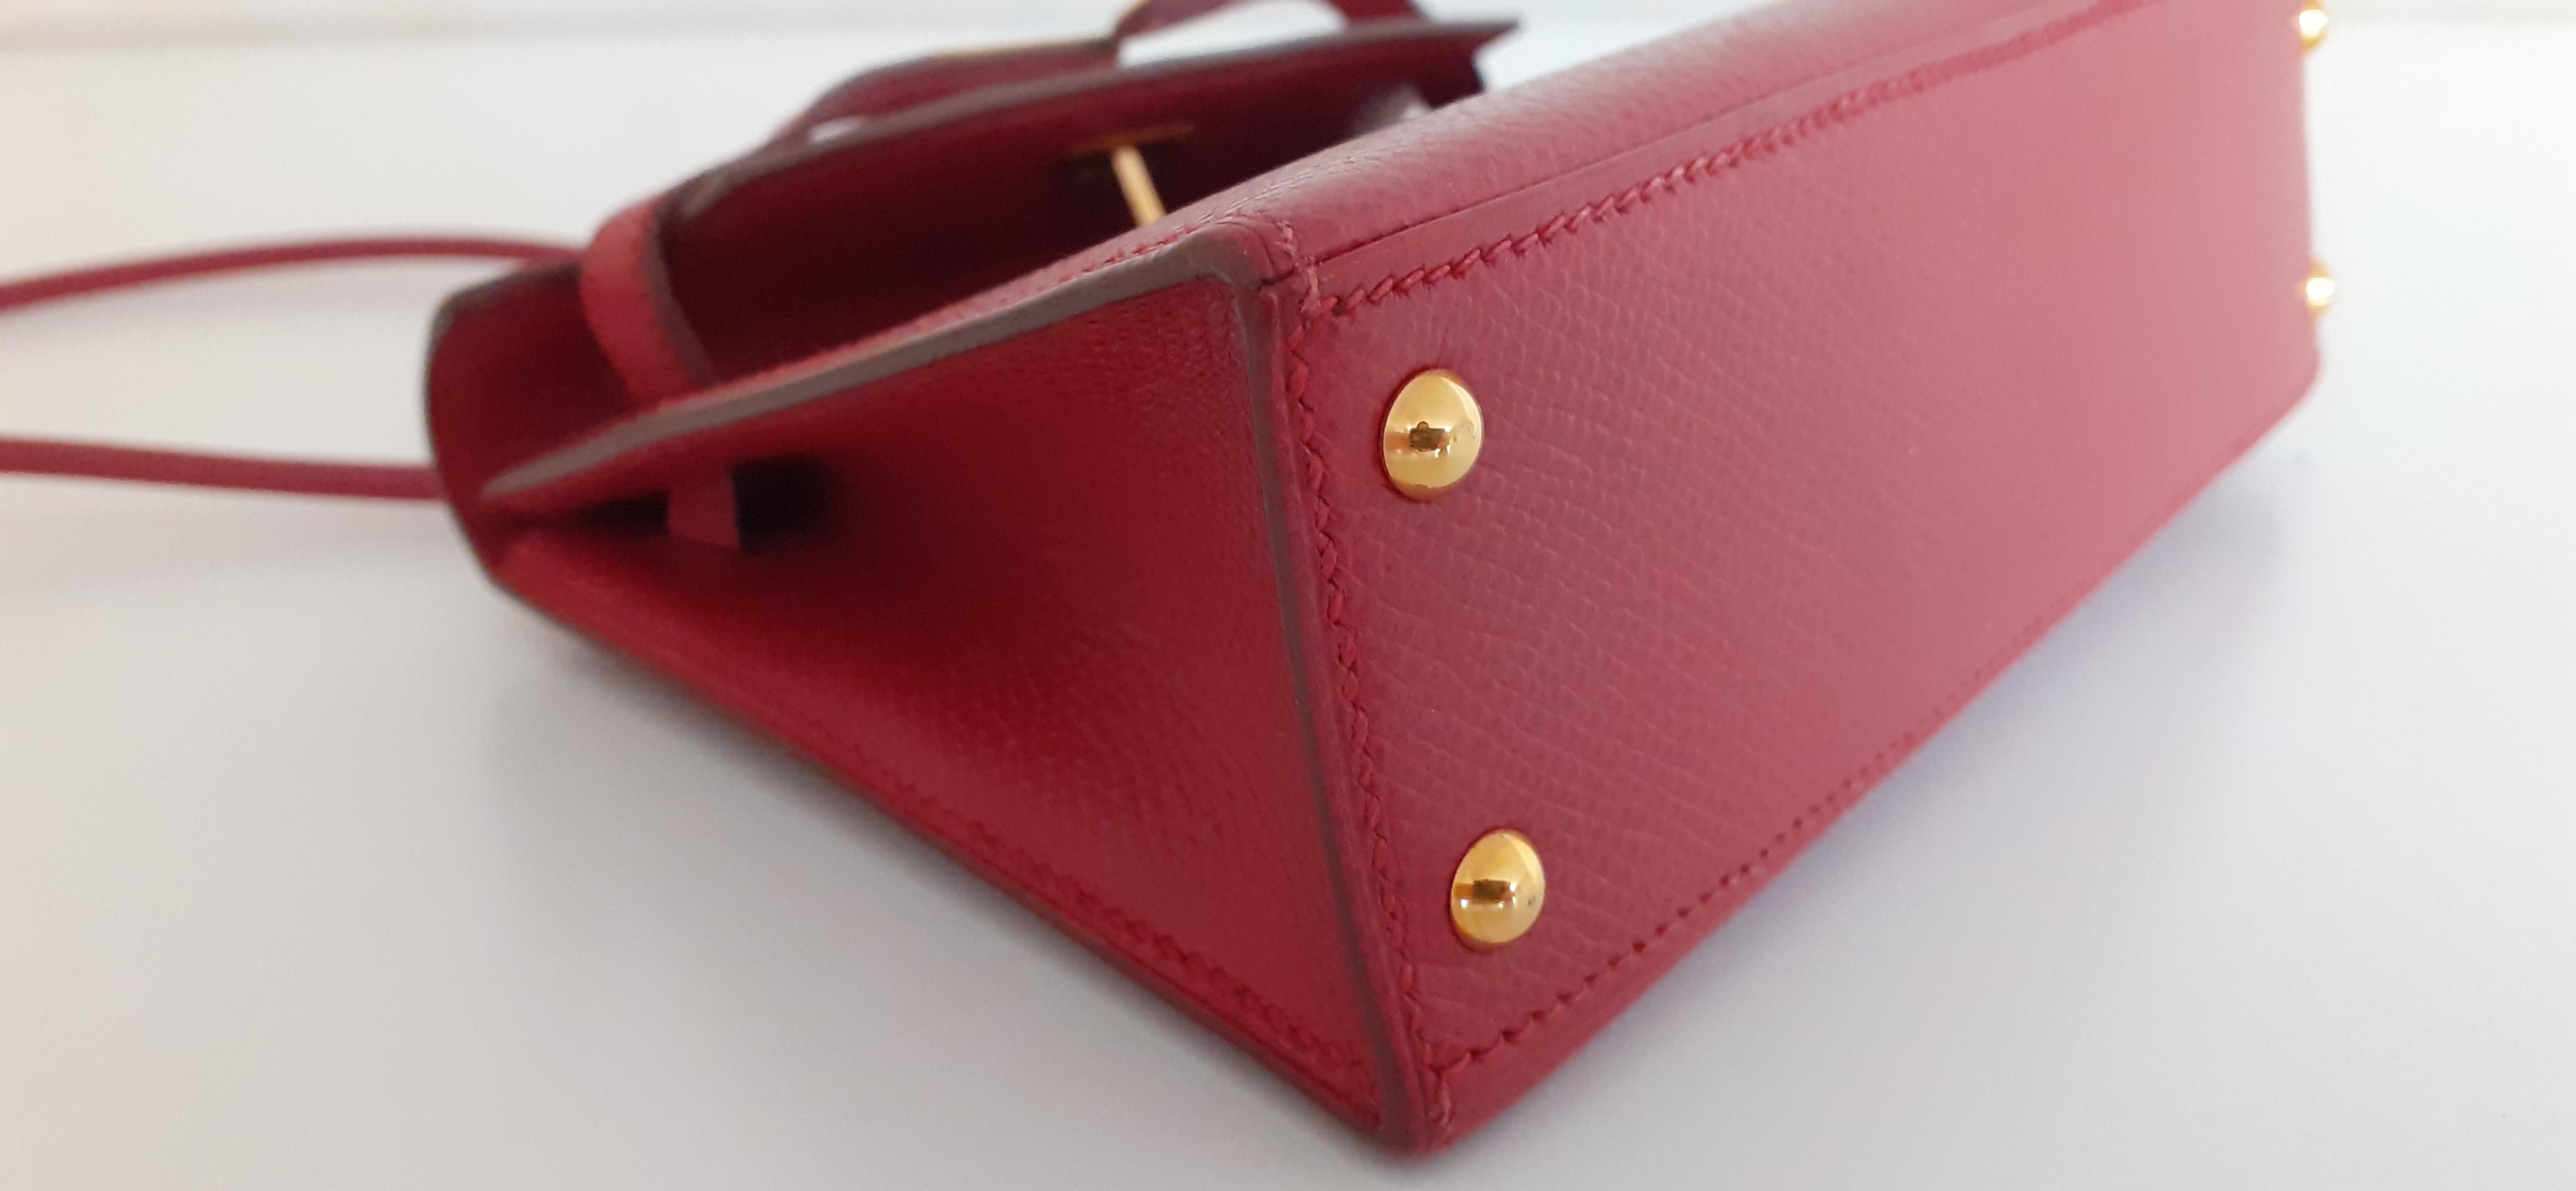 Exceptional Hermès Vintage Micro Kelly 15 cm Sellier Bag Red Leather Gold Hdw For Sale 7